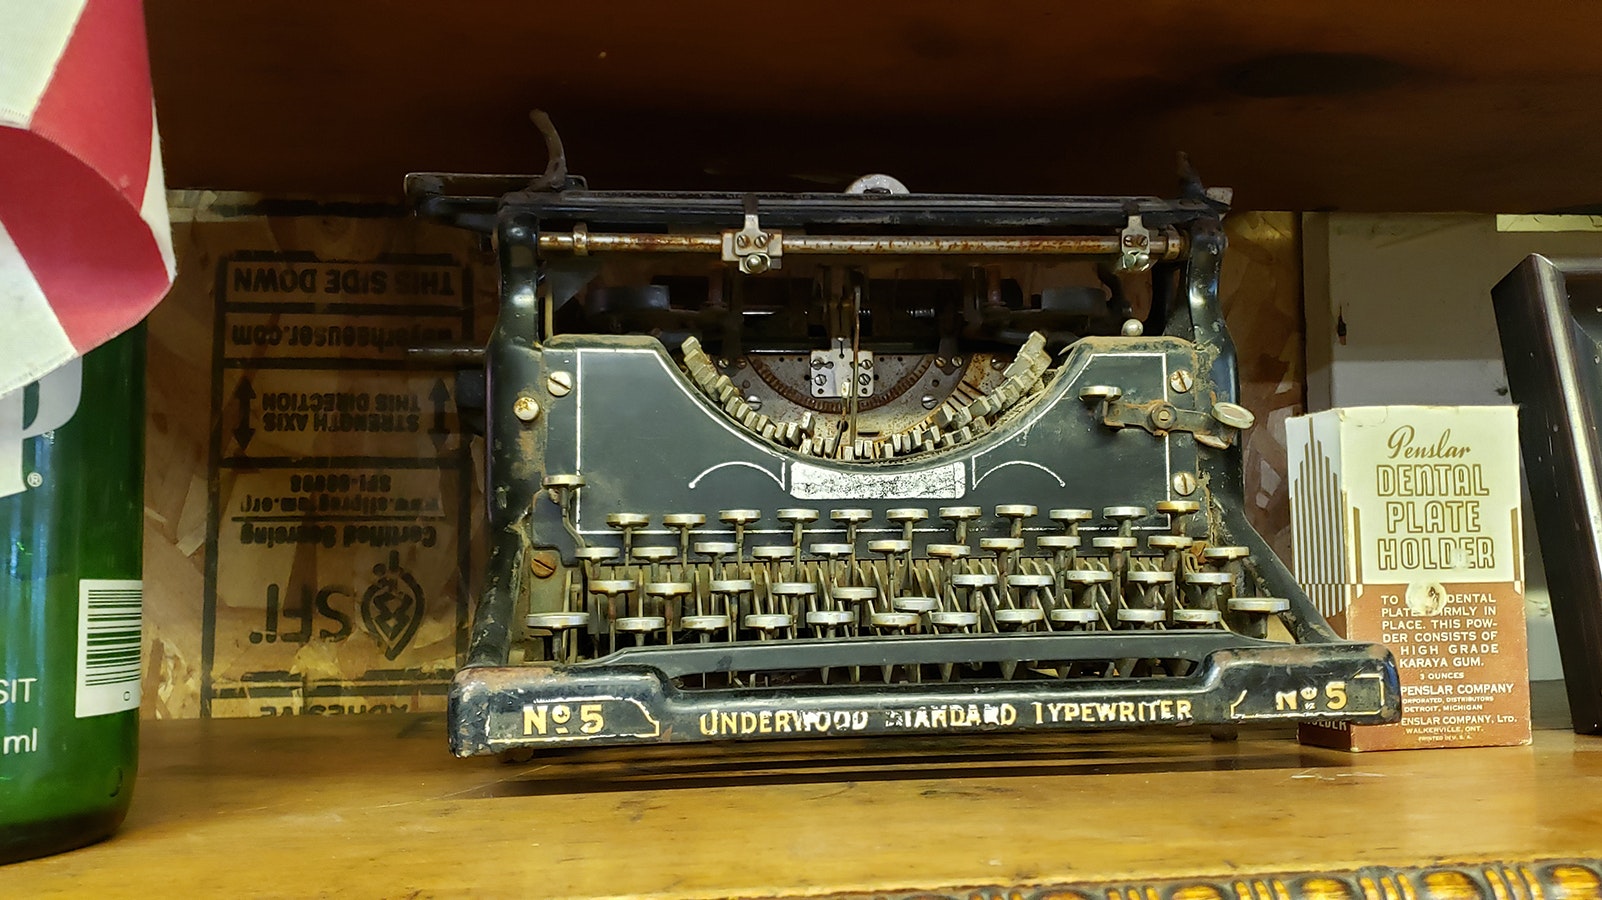 An old Underwood typewriter in the Aladdin General Store.